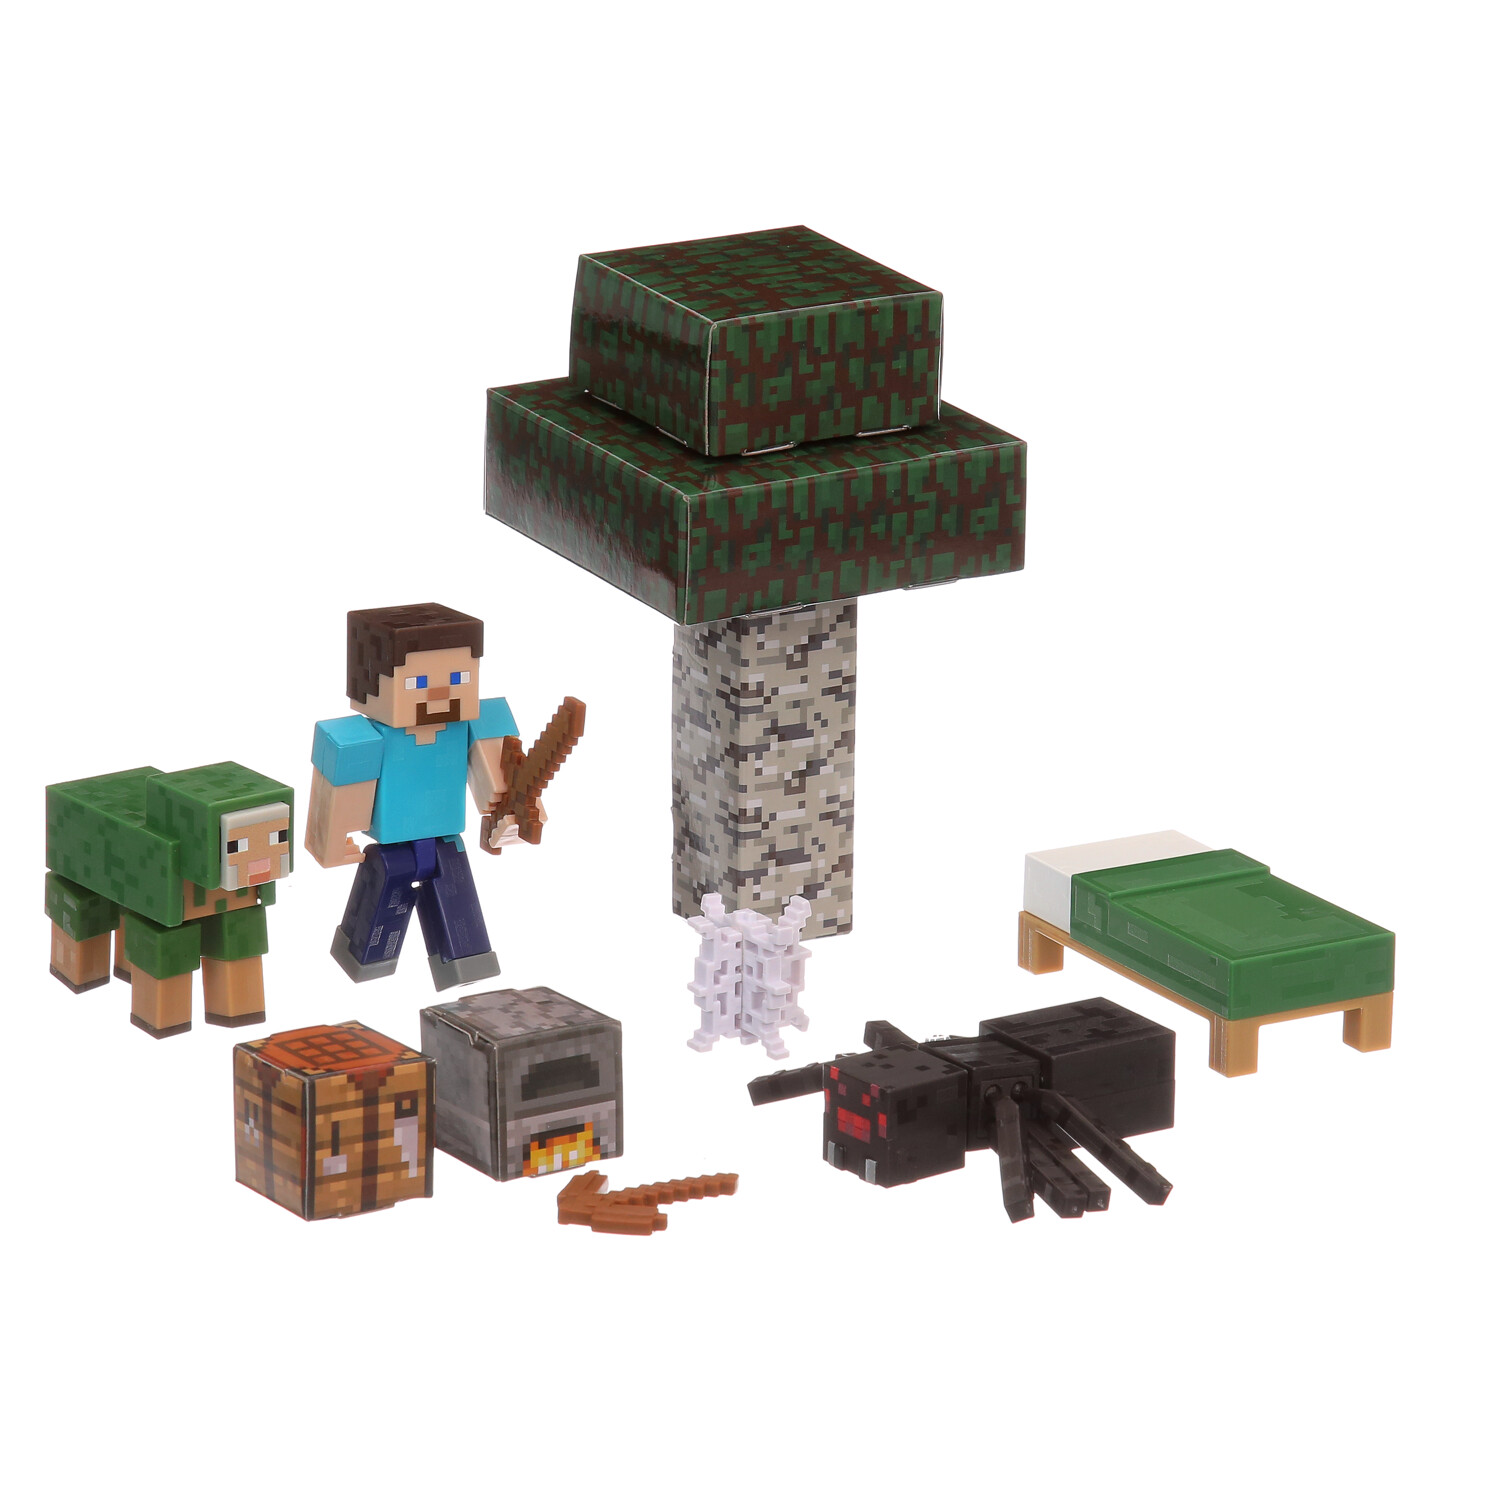  Mattel Minecraft Overworld Noob Adventure Pack Figures  Accessories and Papercraft Blocks, Complete Play in a Box, Toy for Kids  Ages 6 Years and Older : Toys & Games